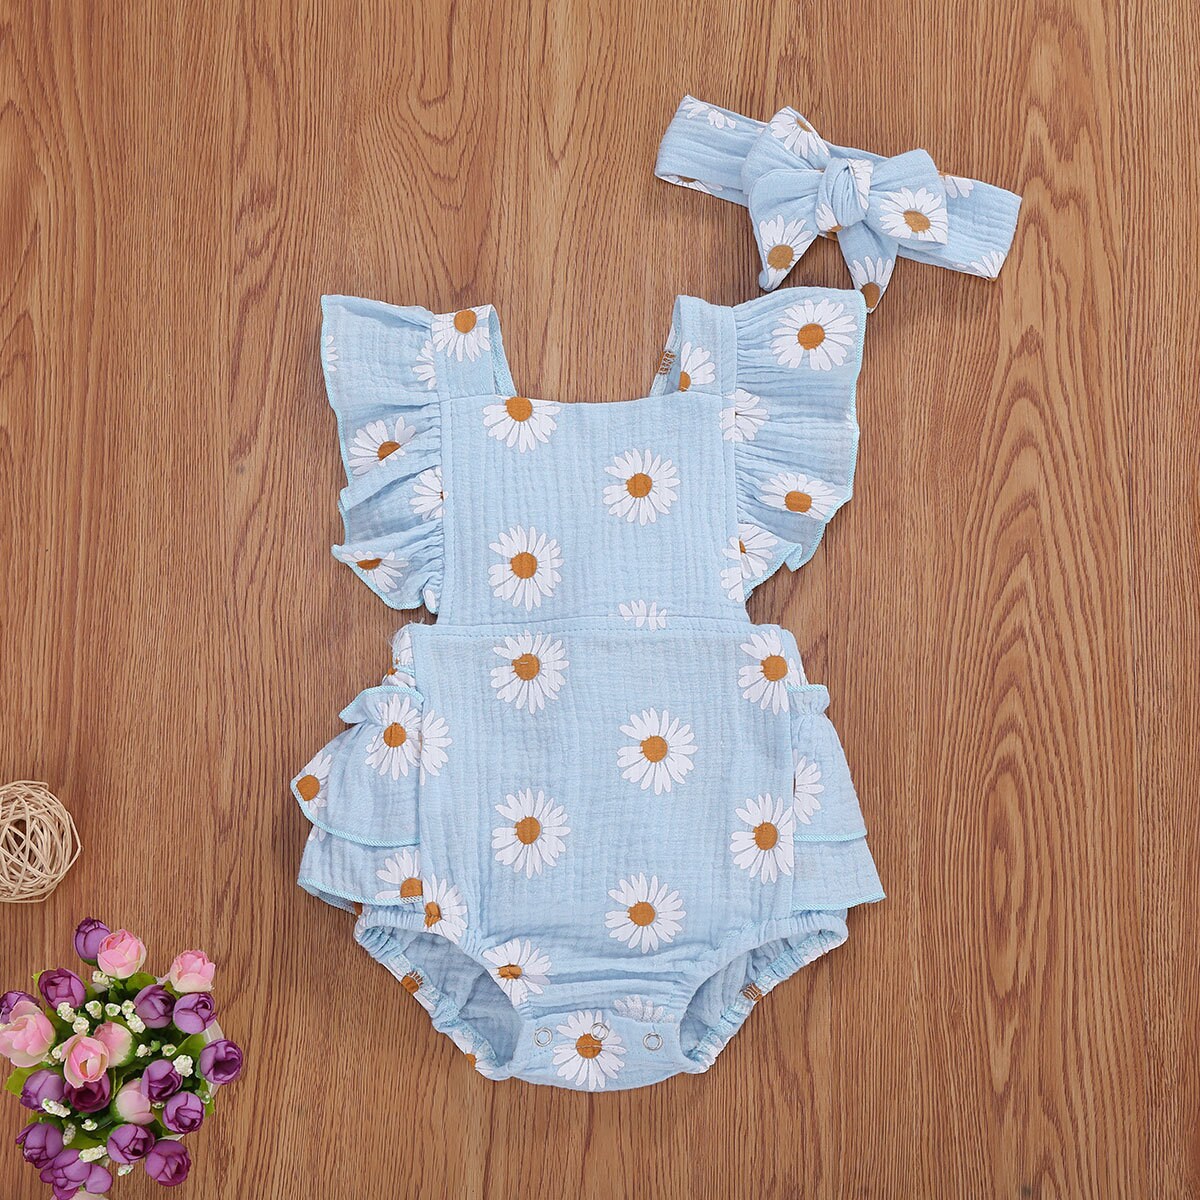 Daisy Baby Girl Summer Toddler Kids Baby Clothes Outfits - Etsy